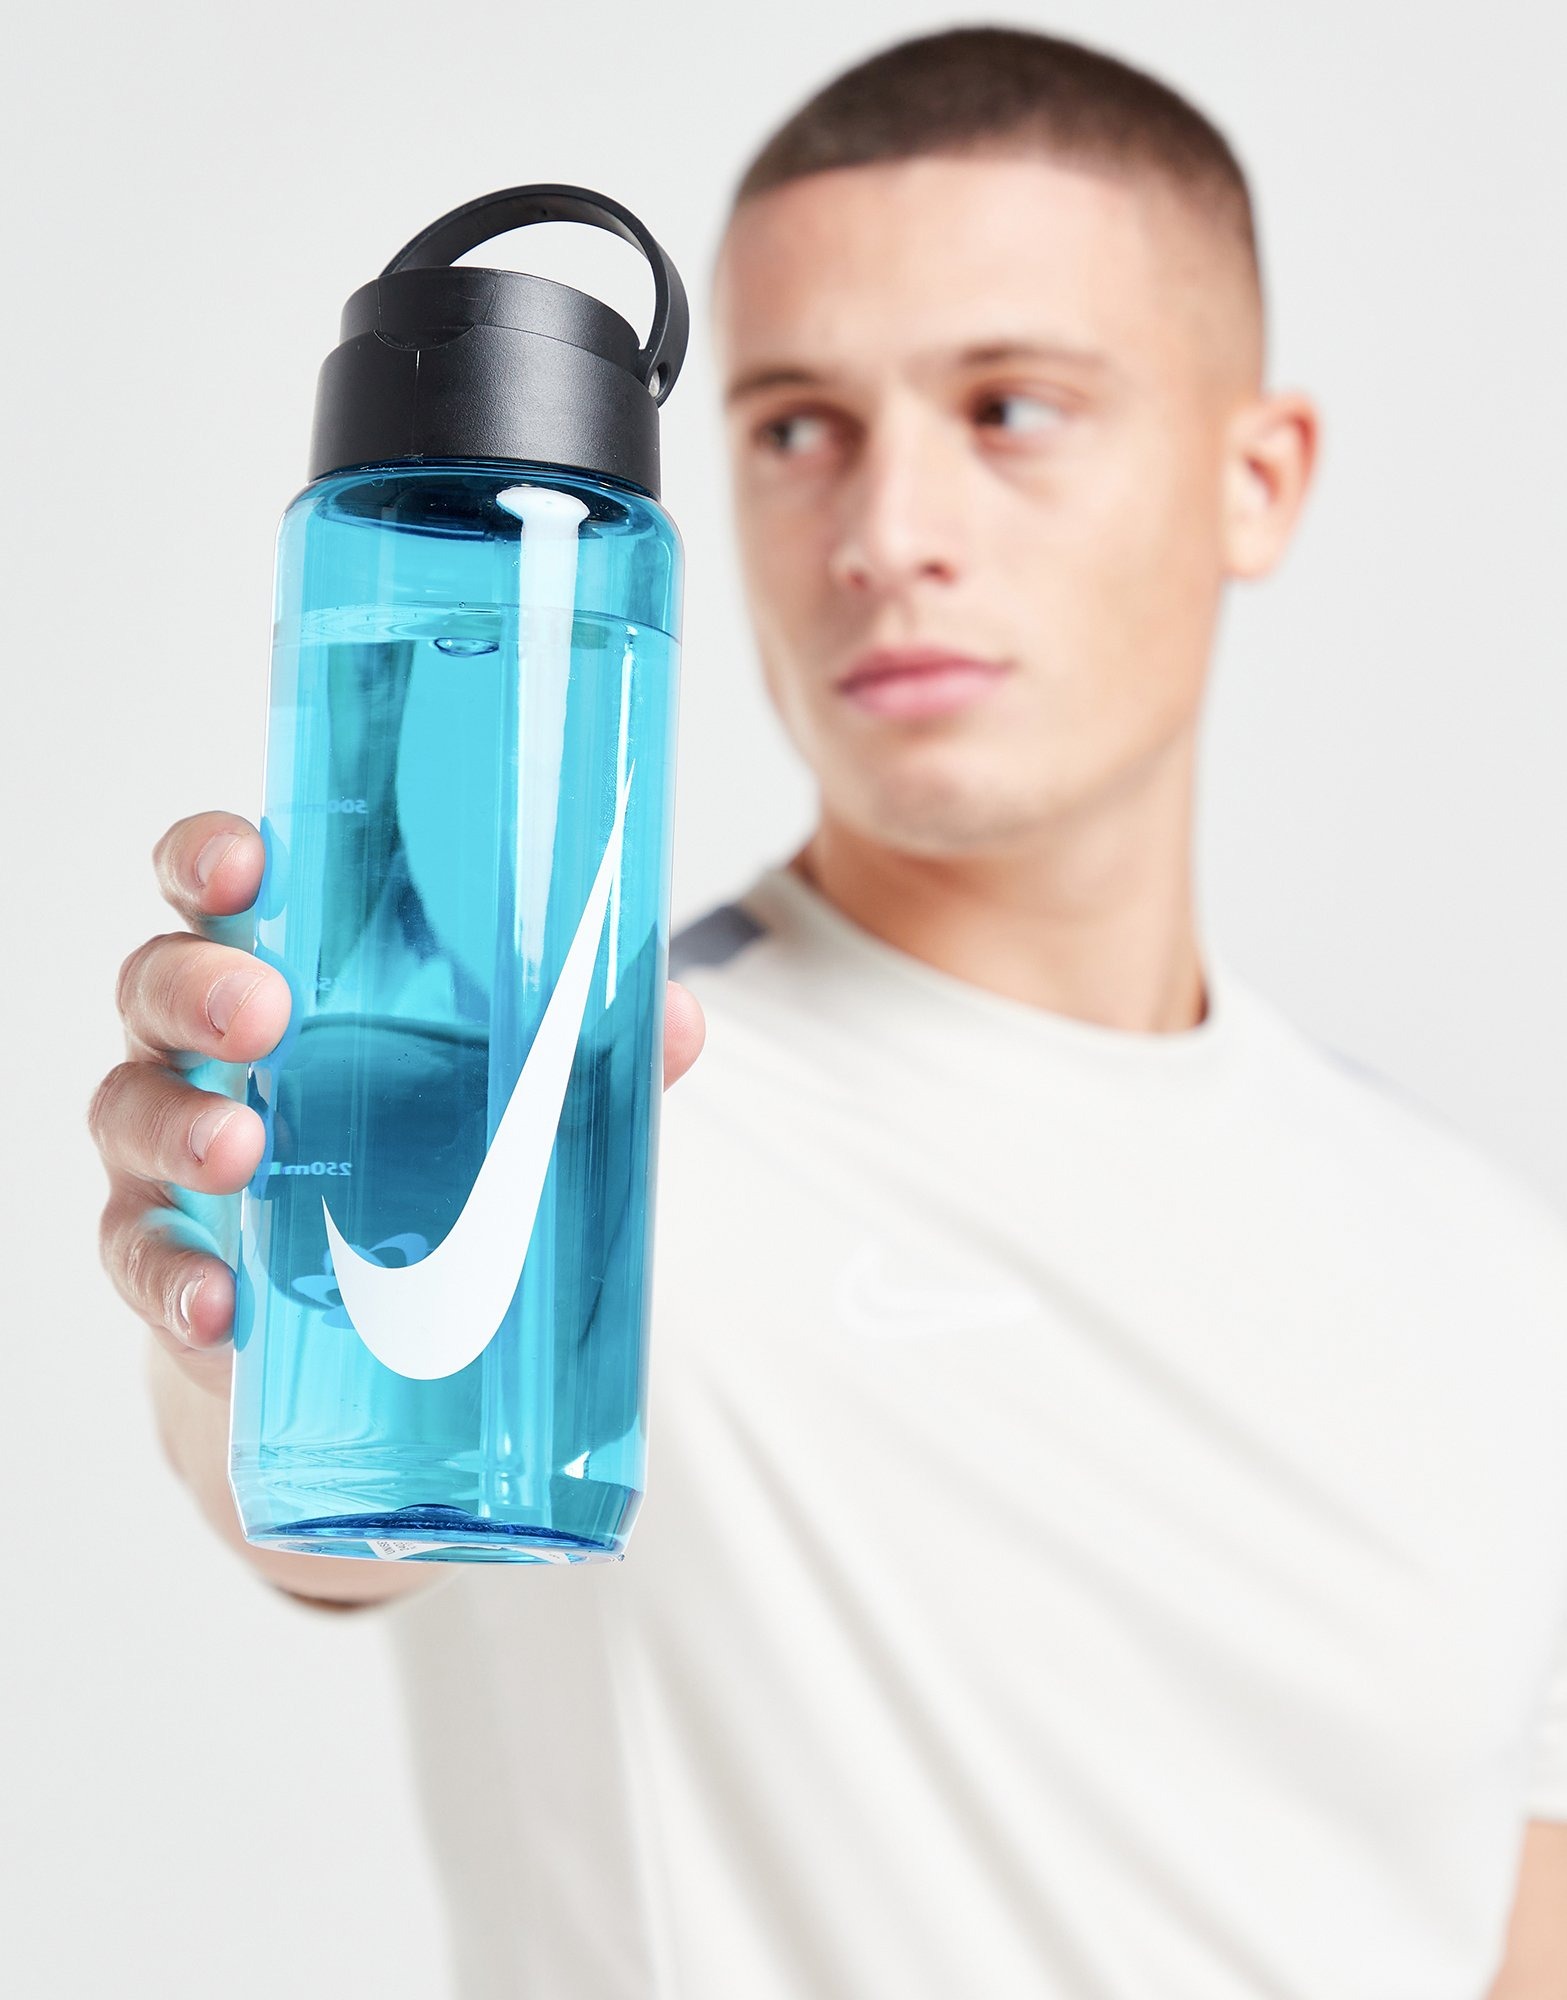 Nike Recharge Stainless Steel Straw Bottle (12 oz)